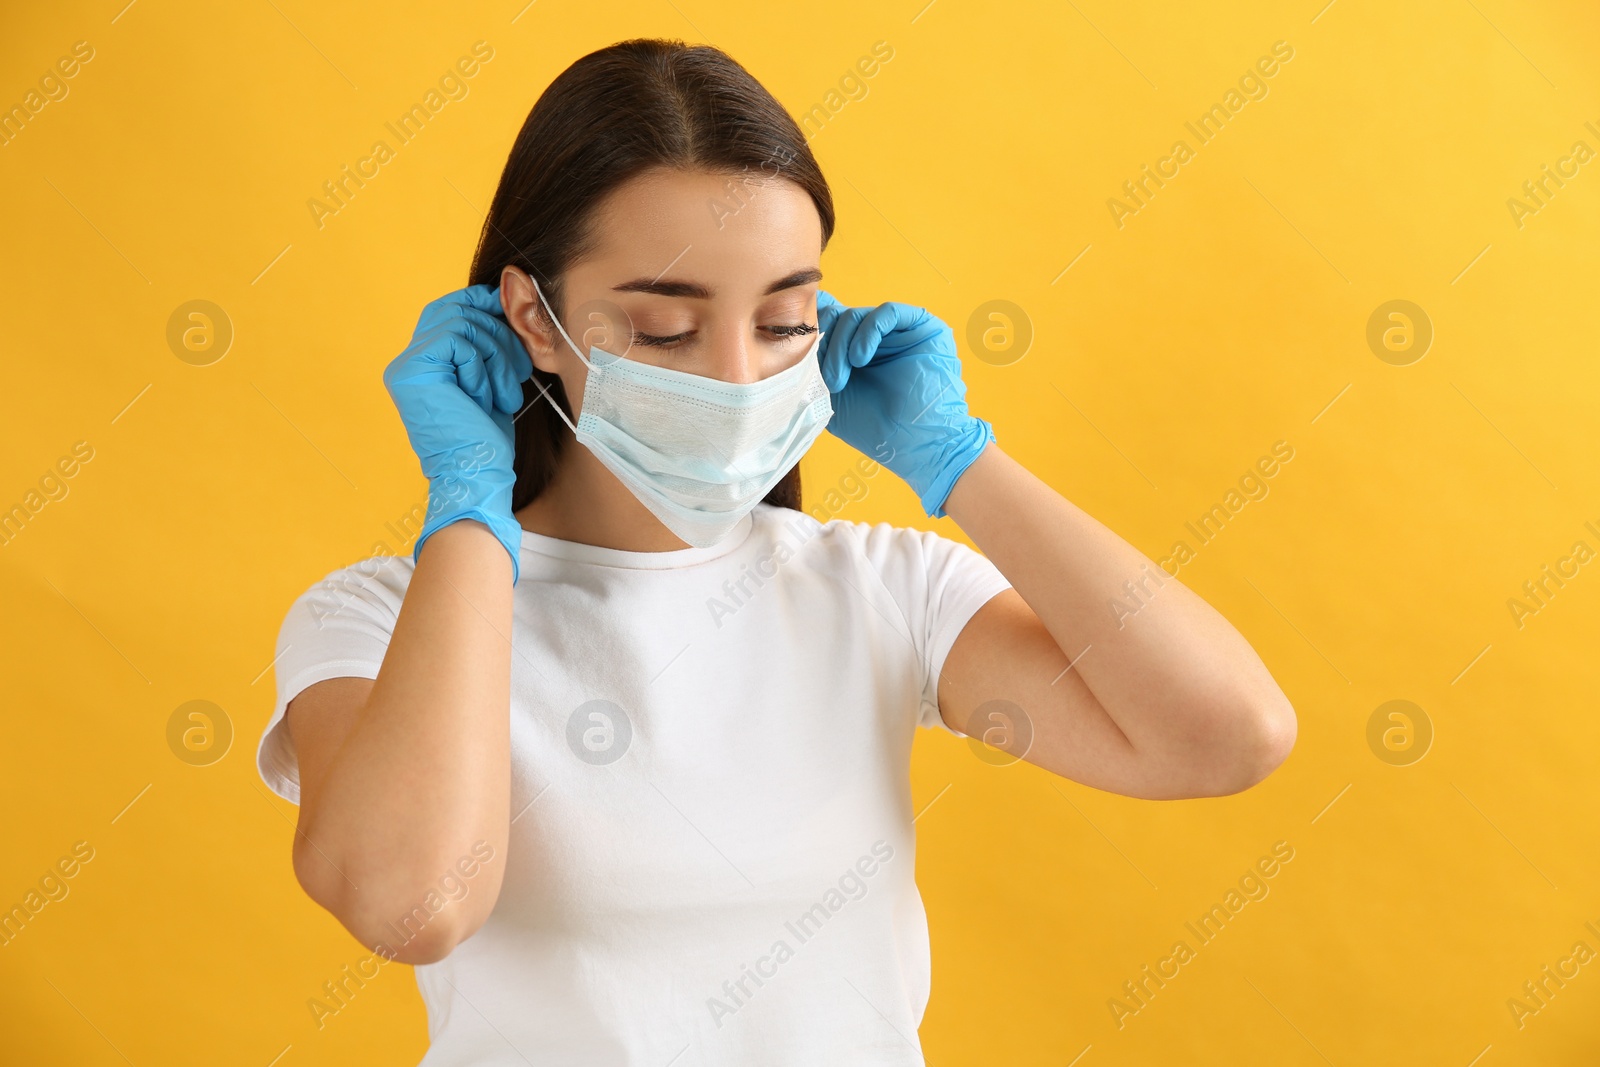 Photo of Woman in medical gloves putting on protective face mask against yellow background